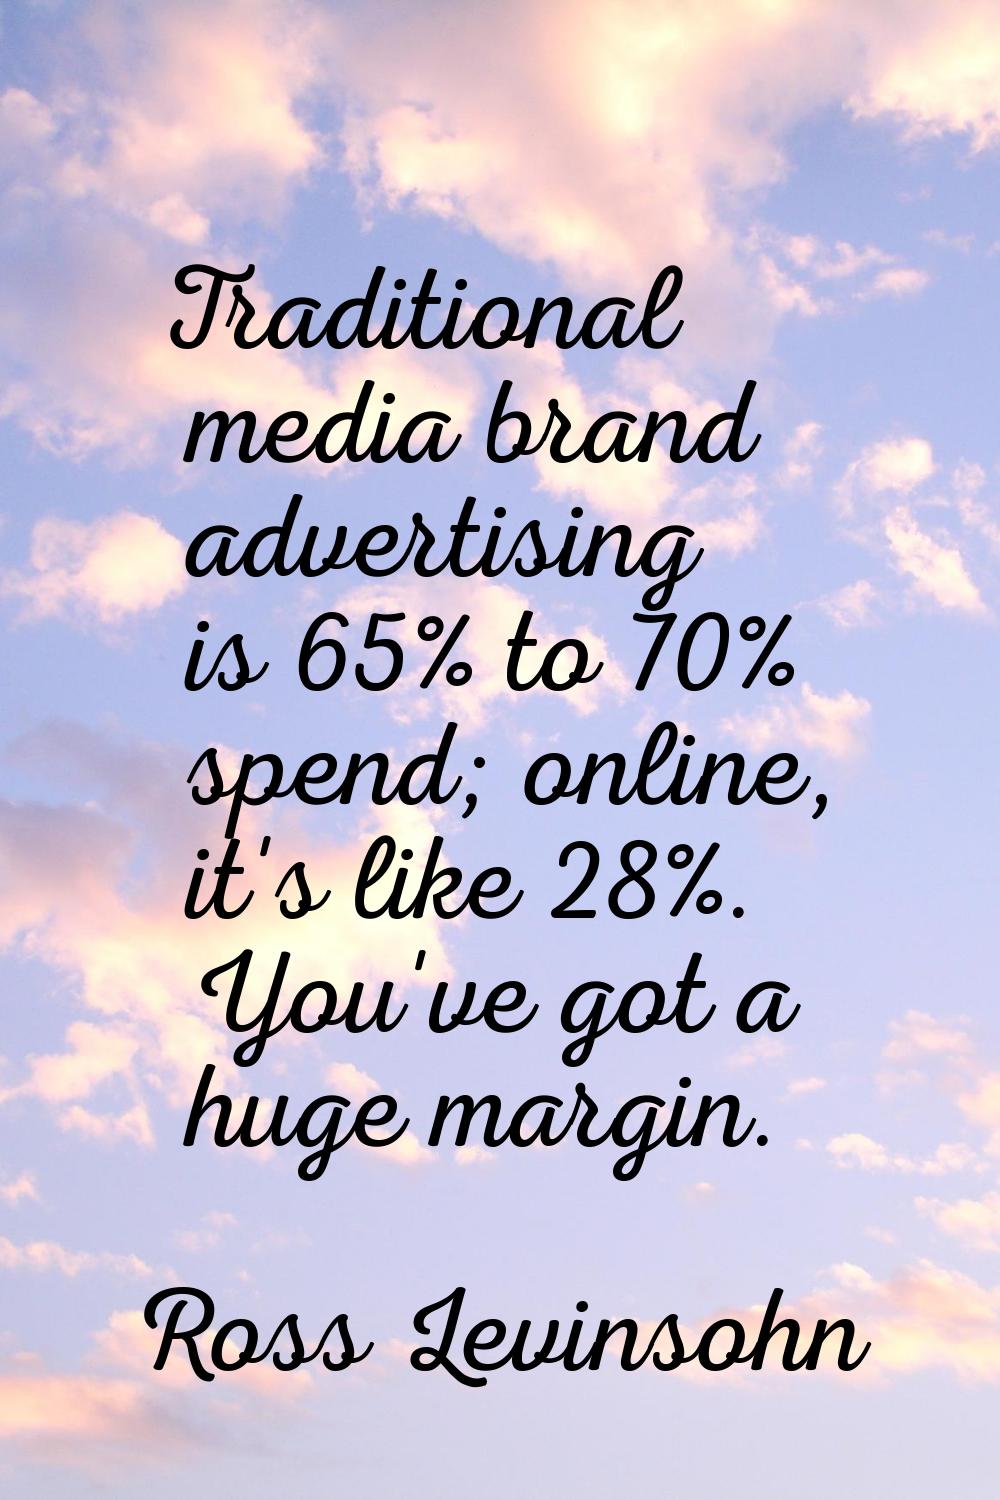 Traditional media brand advertising is 65% to 70% spend; online, it's like 28%. You've got a huge m